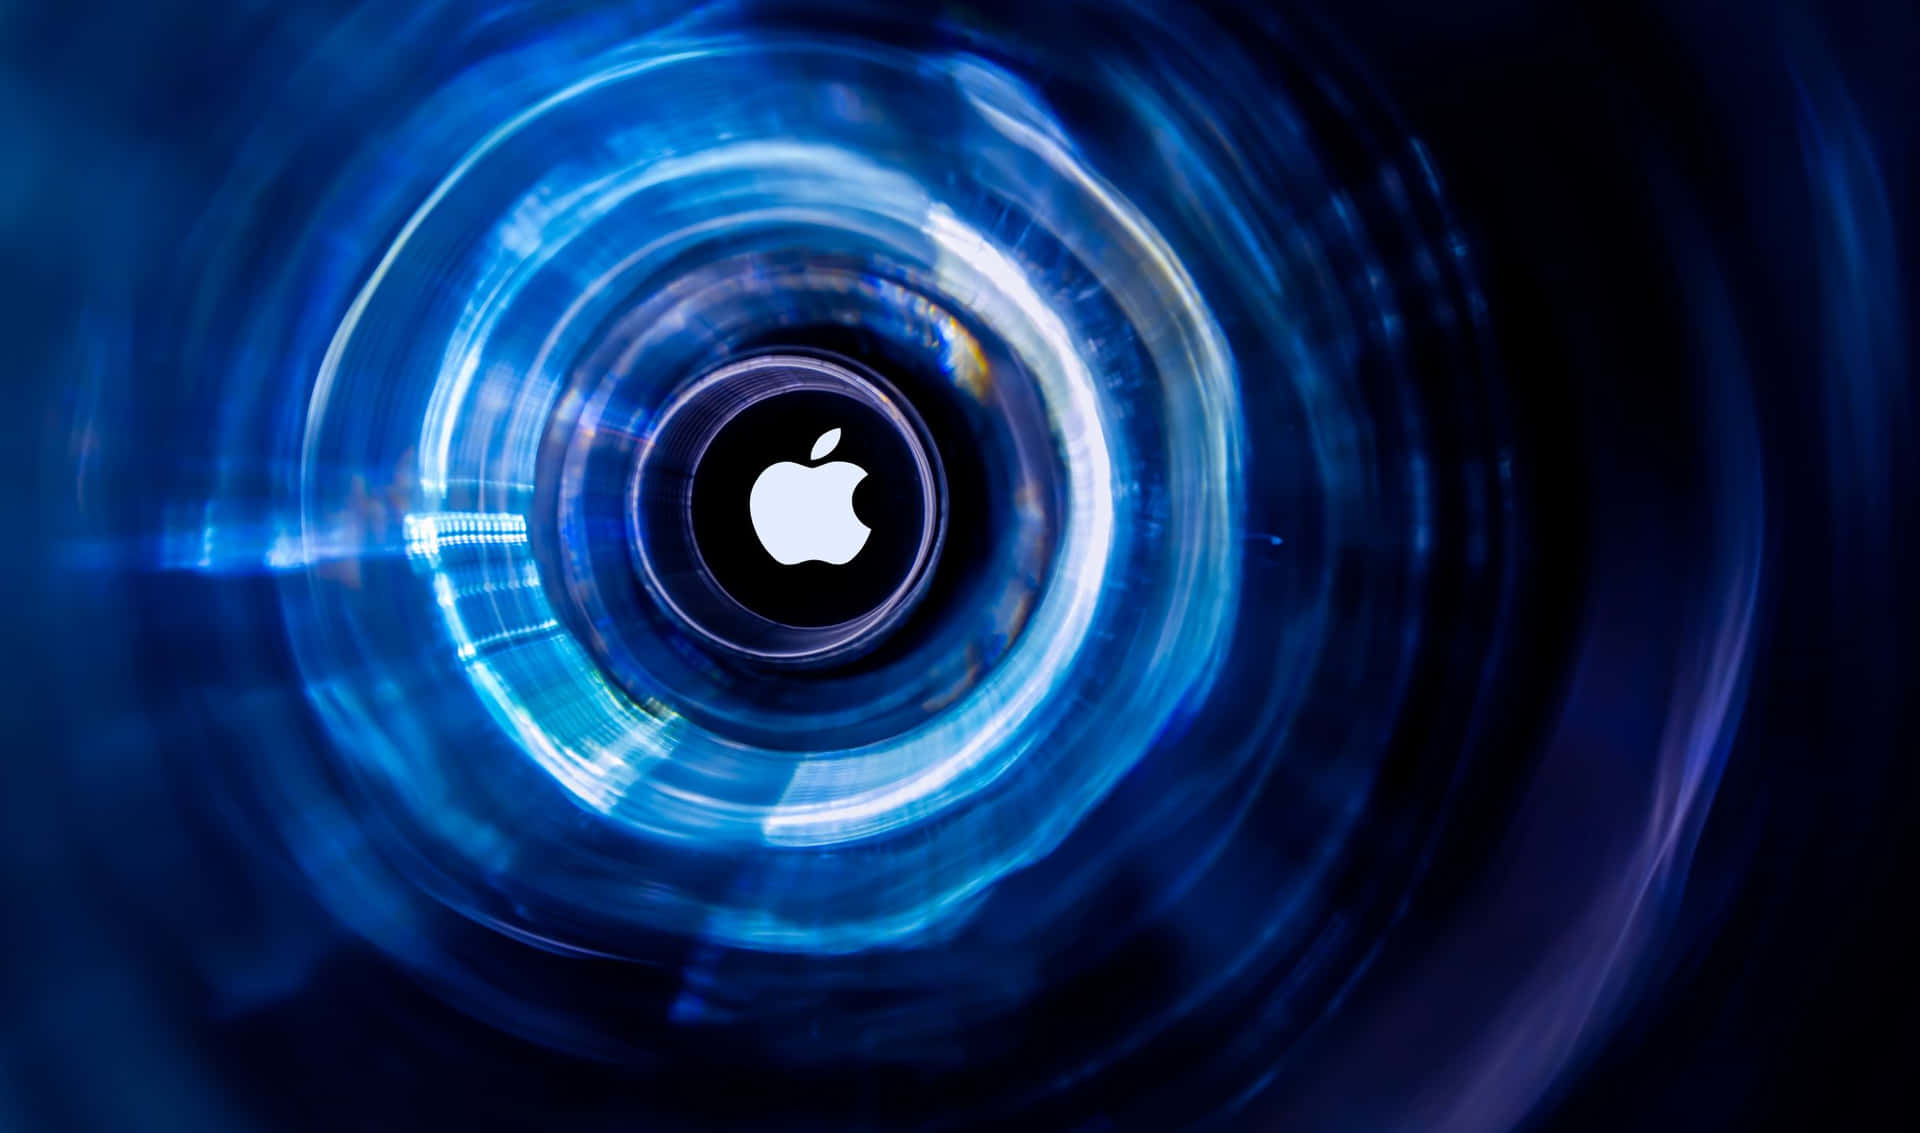 2440x1440 Apple Logo In Blue Circles Background